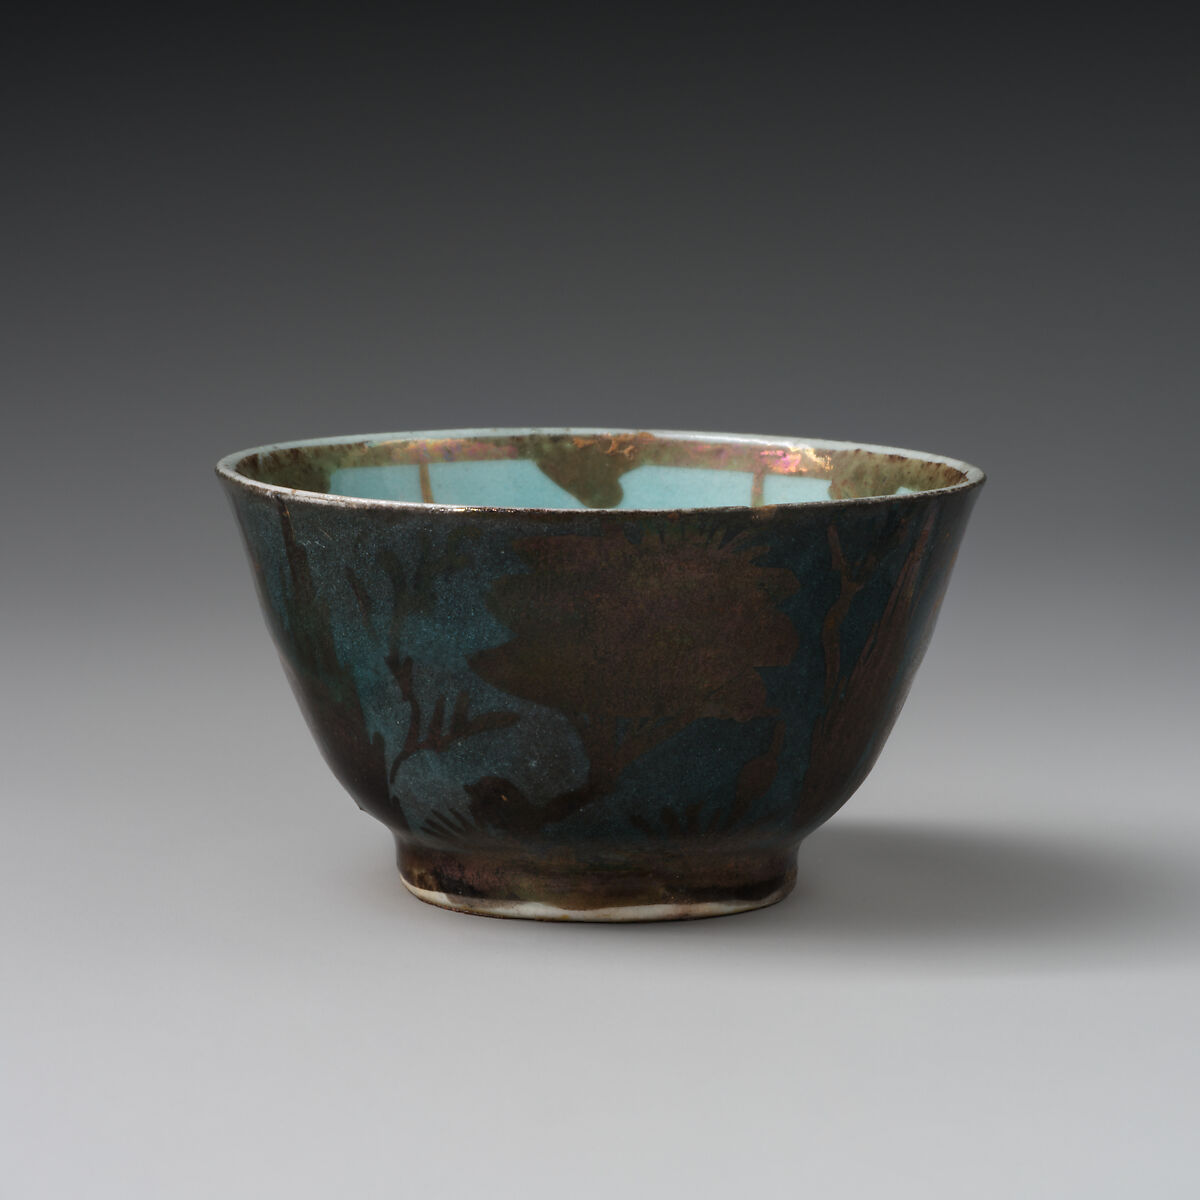 Cup, Stonepaste; luster-painted on opaque light blue glaze and white glaze (rim) 